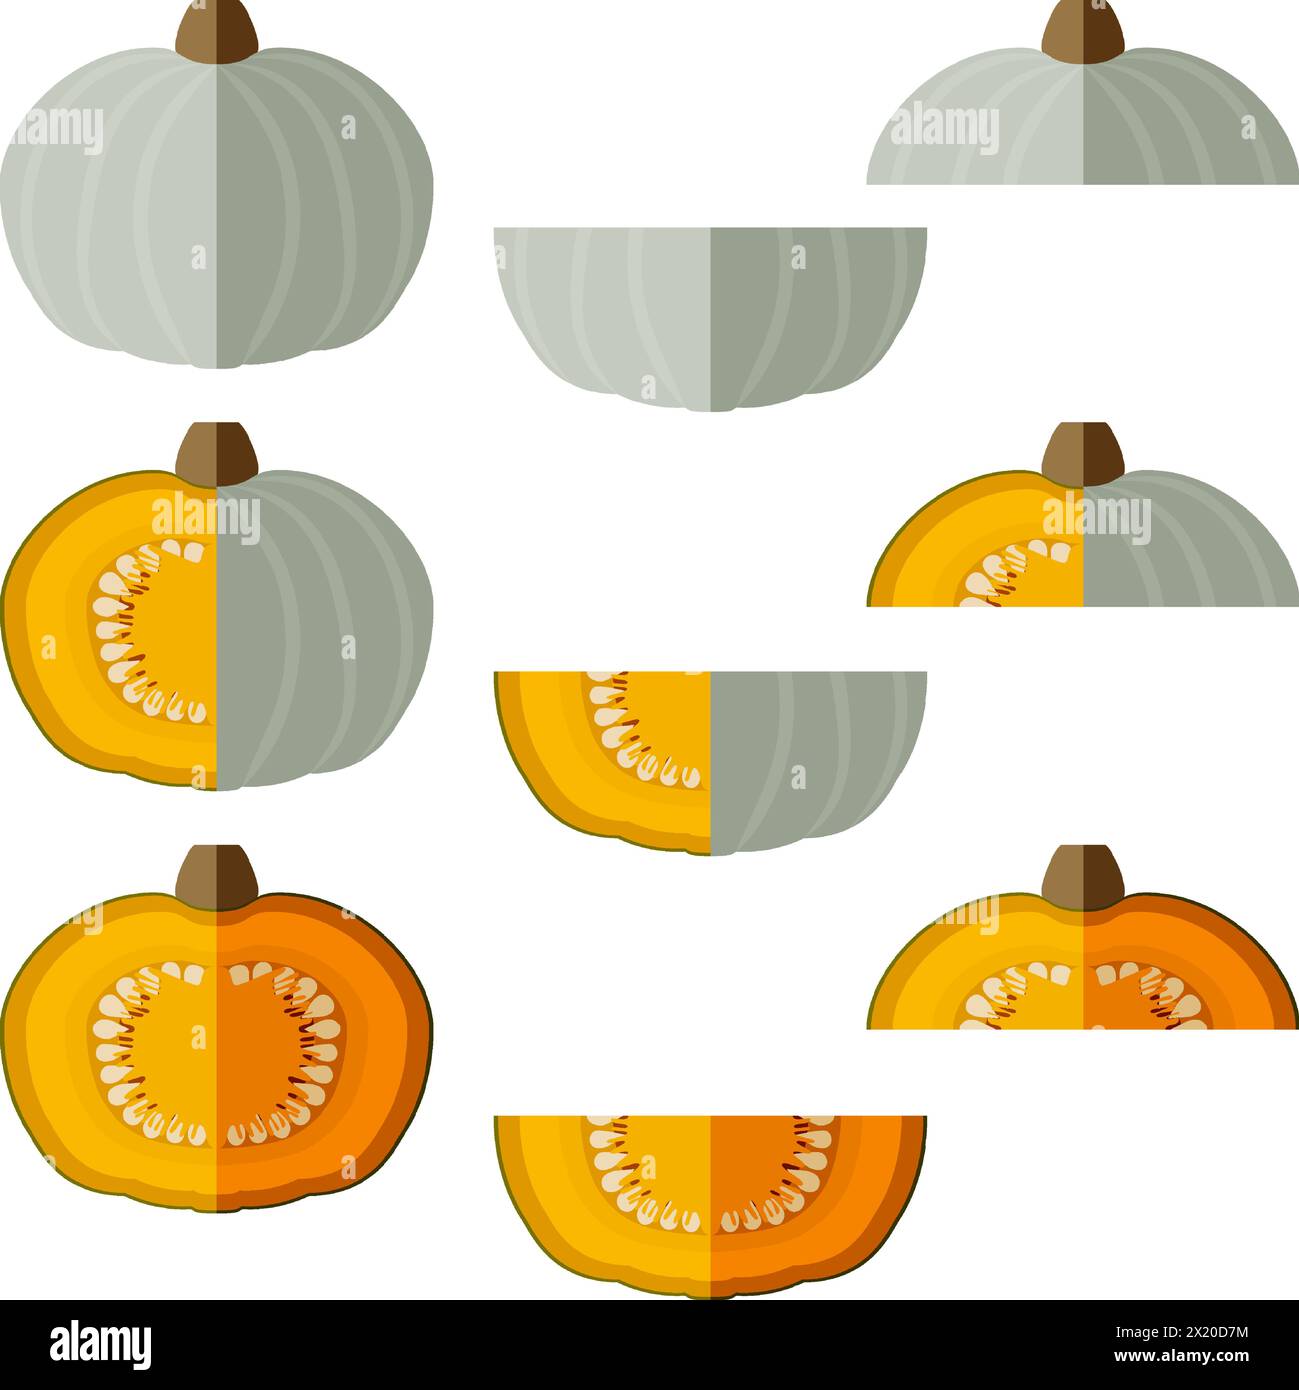 Set of Crown Prince Squash. Winter squash. Cucurbita maxima. Fruits and vegetables. Flat style. Isolated vector illustration. Stock Vector